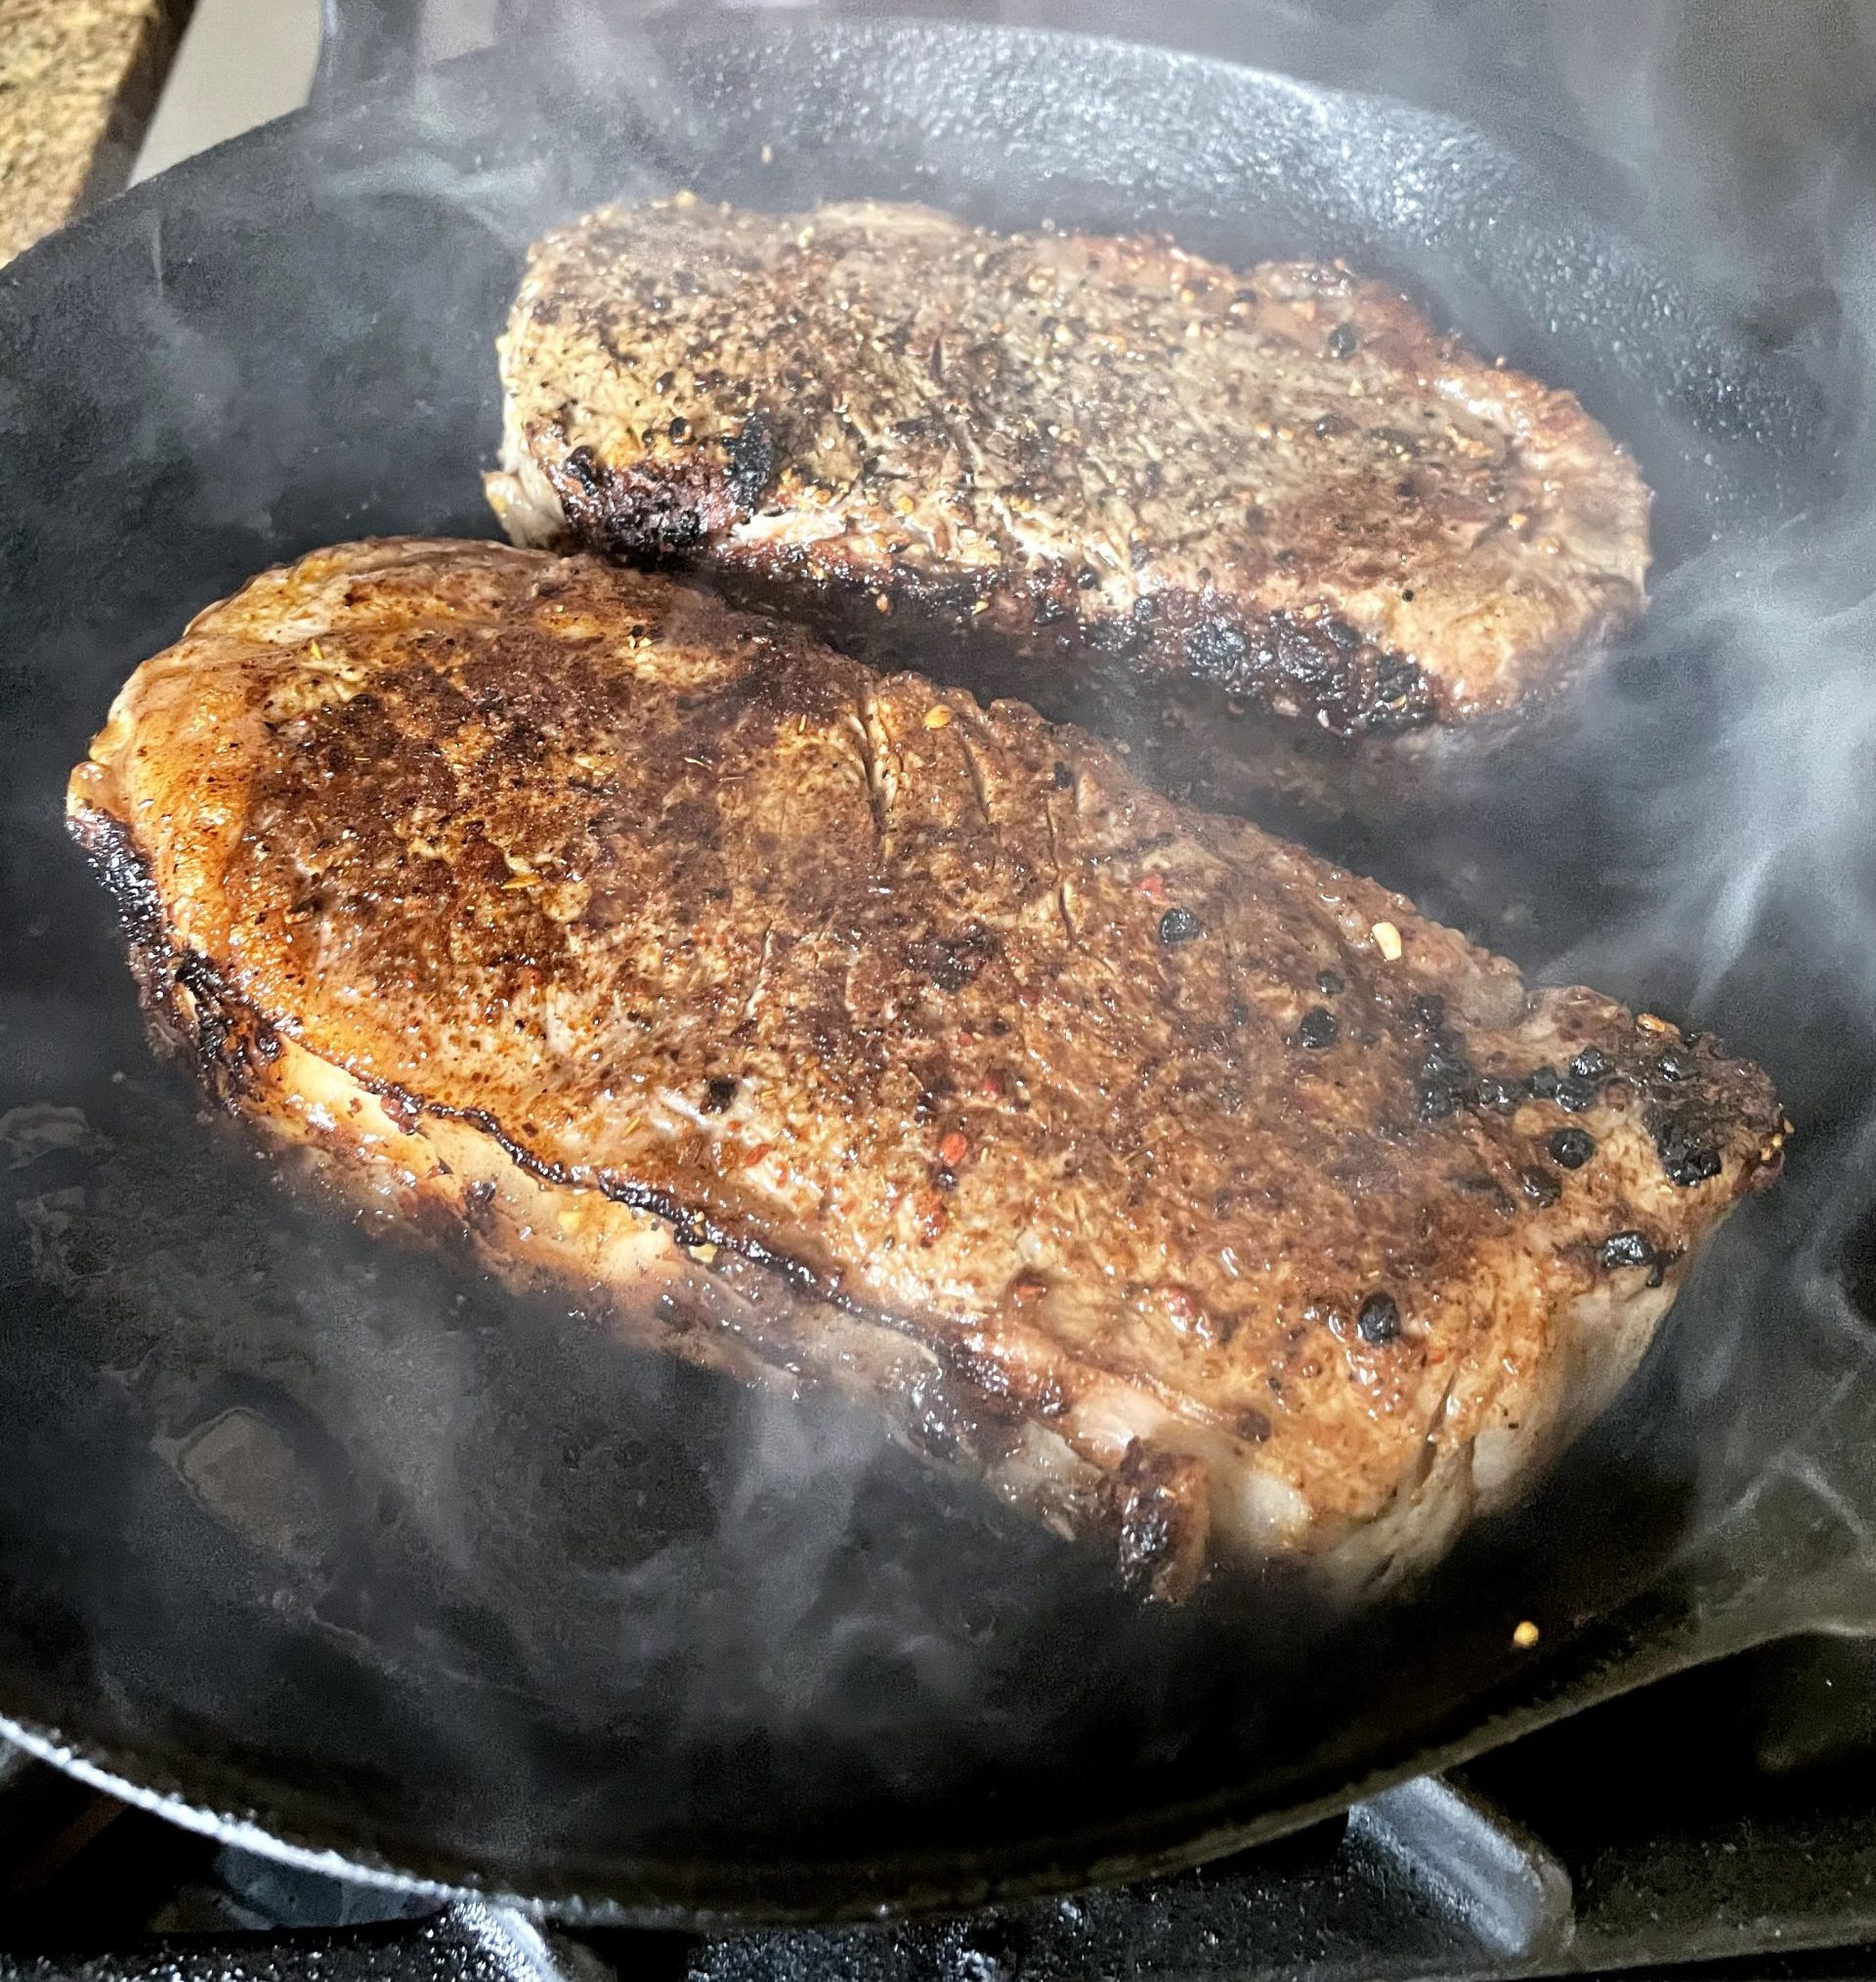 Sear steaks on a HOT cast iron skillet.